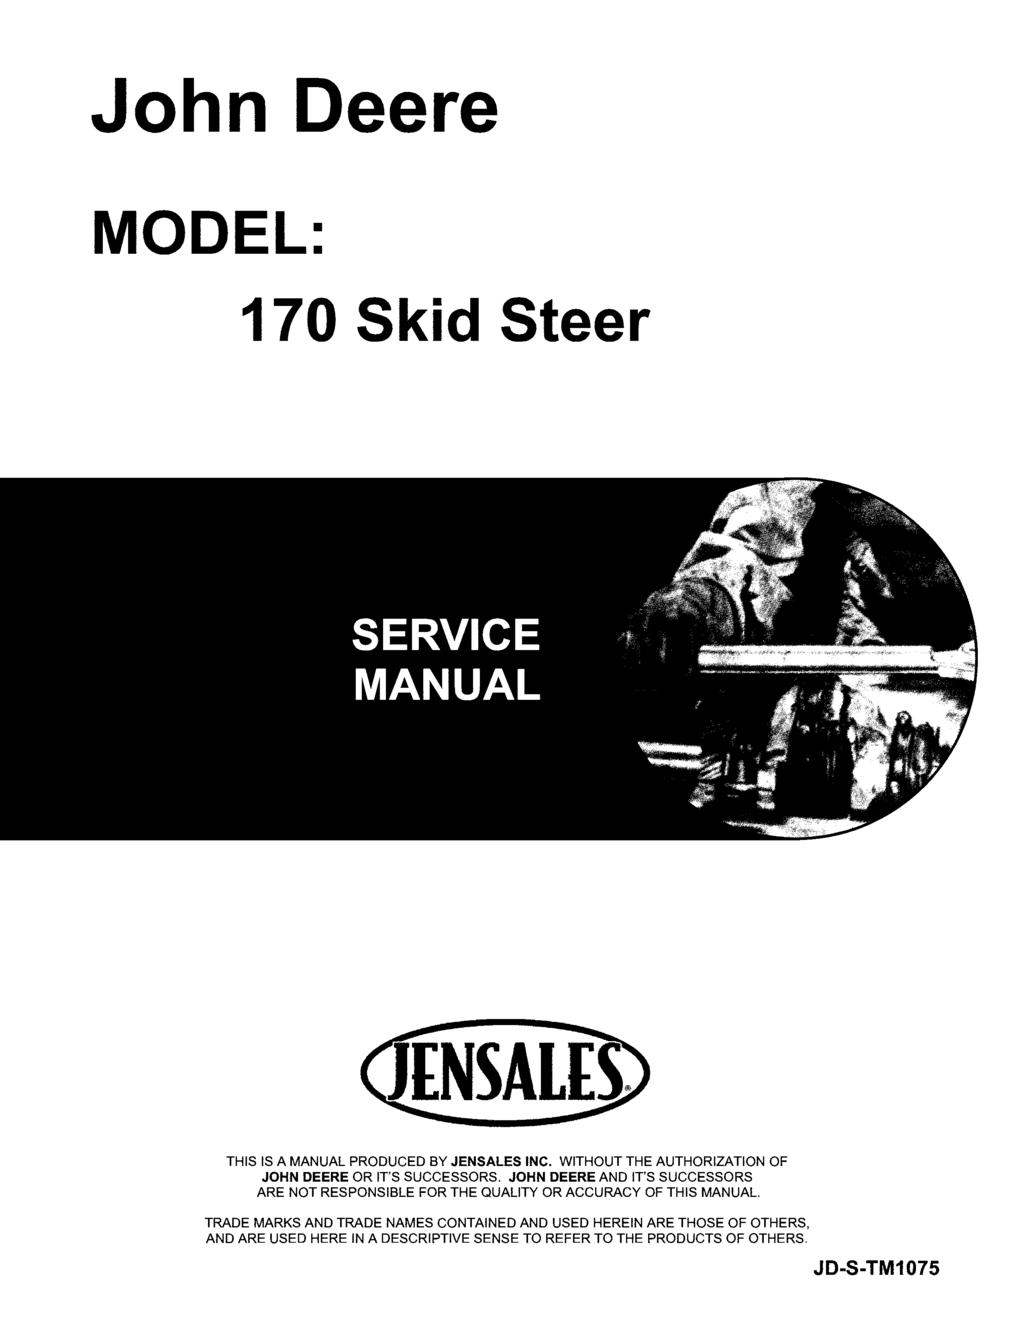 John Deere MODEL: 170 Skid Steer THIS IS A MANUAL PRODUCED BY JENSALES INC. WITHOUT THE AUTHORIZATION OF JOHN DEERE OR IT'S SUCCESSORS.